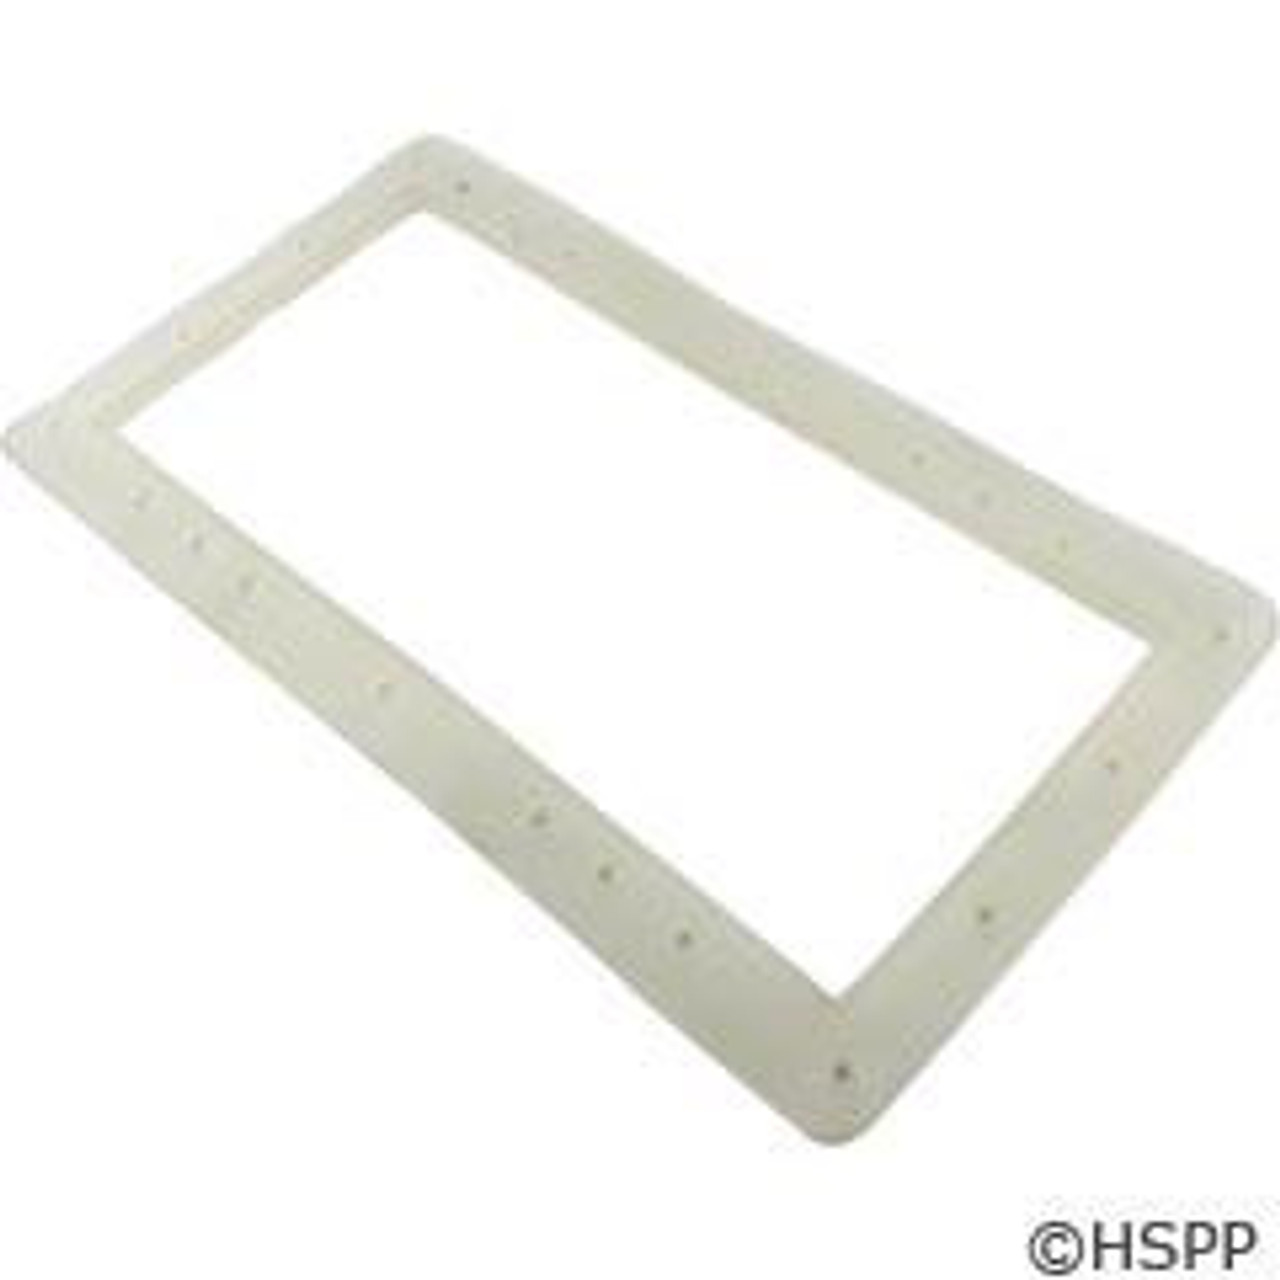 Skimmer Gasket, Waterway FloPro, Wide Mouth, For Faceplate